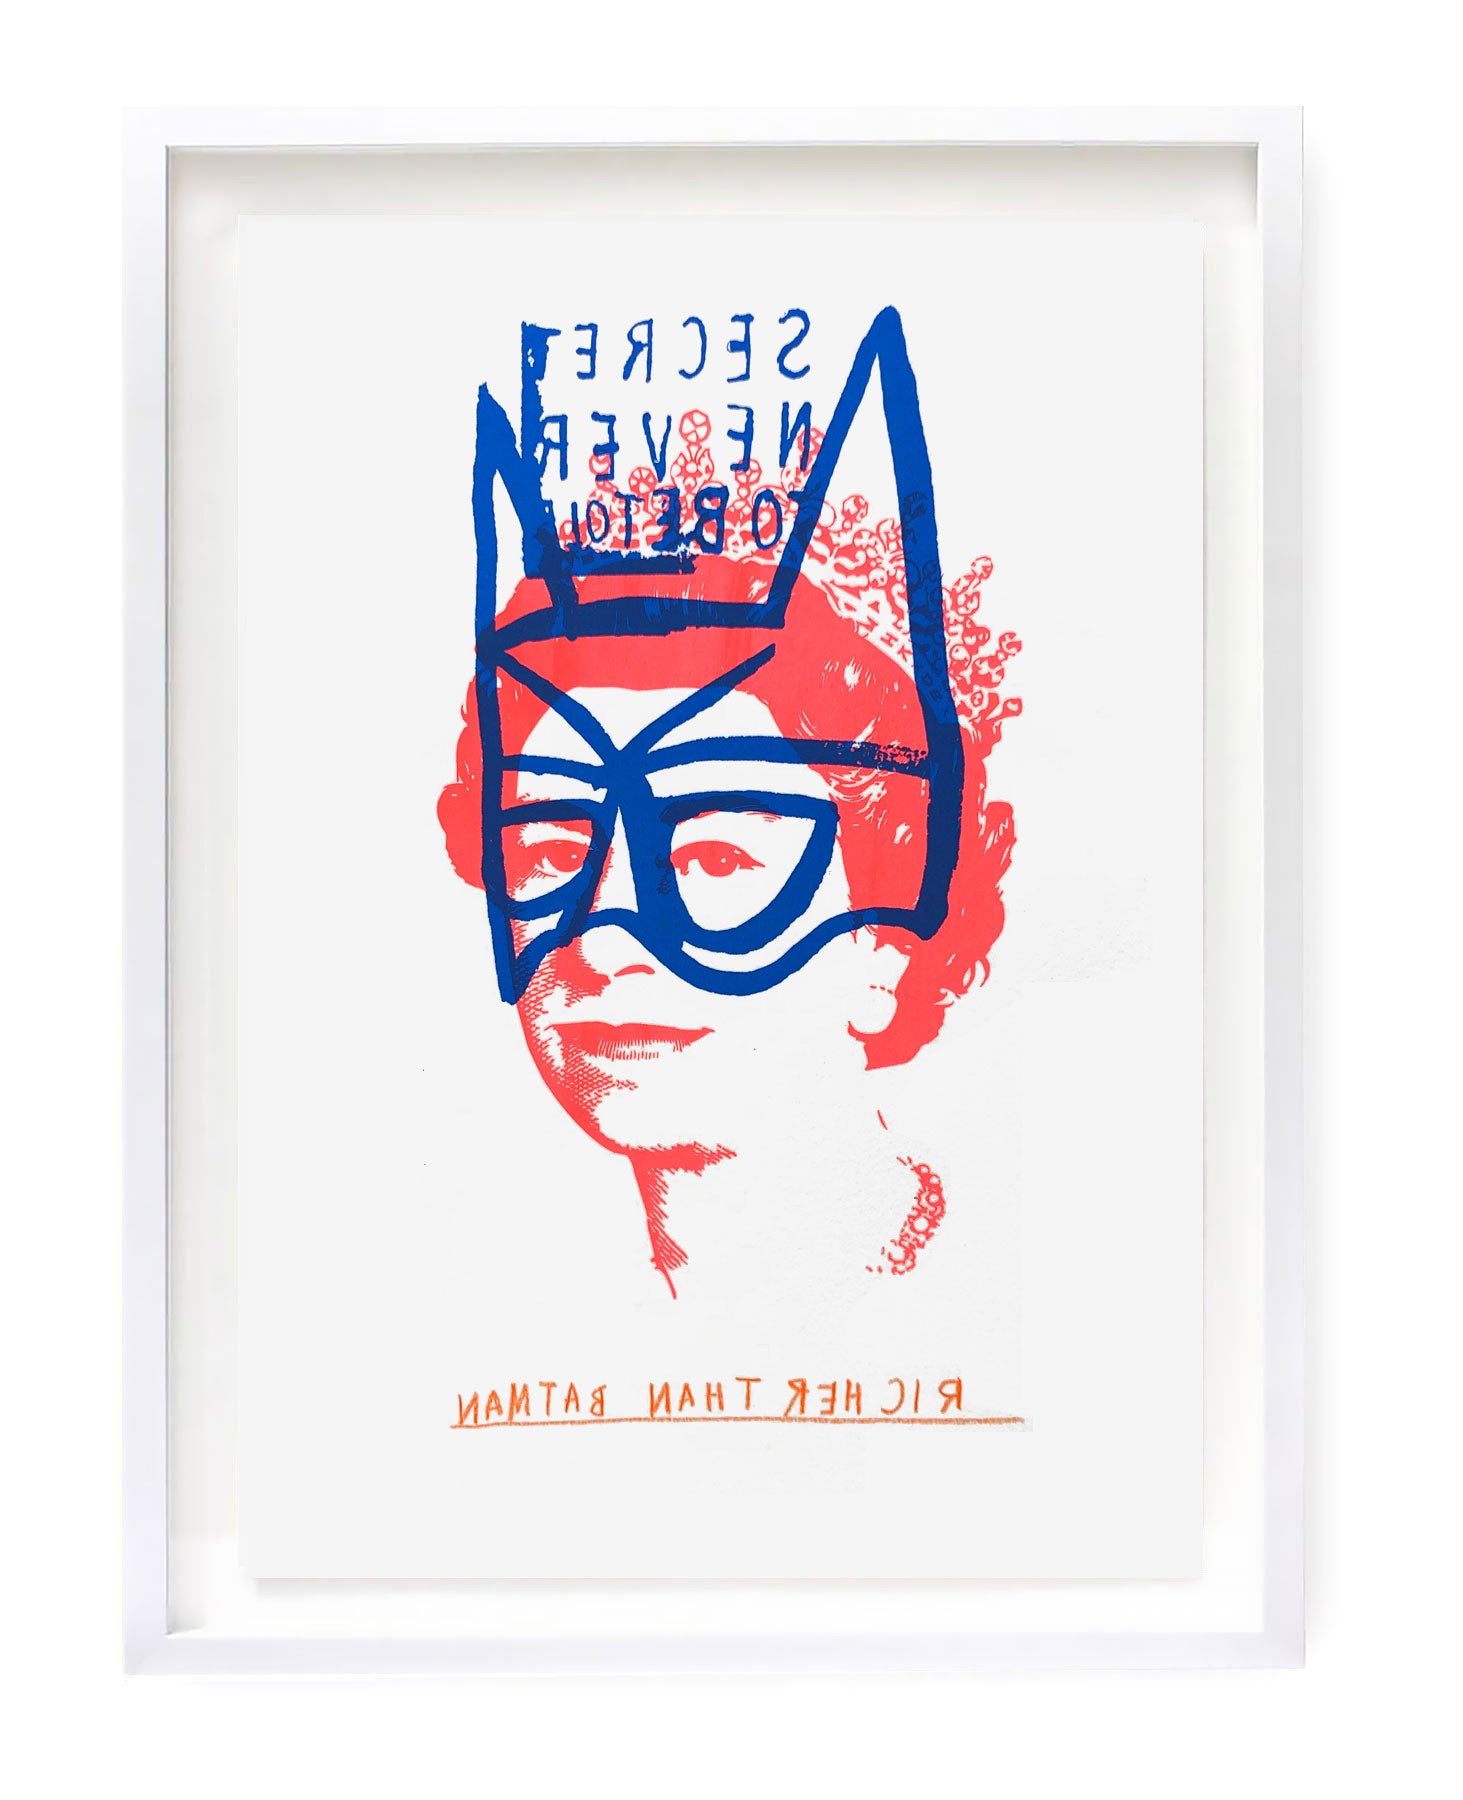 Headshot of Queen Elizabeth II with a hand drawn blue batman mask and the words 'secret never to be told' created by Heath Kane and David Bray